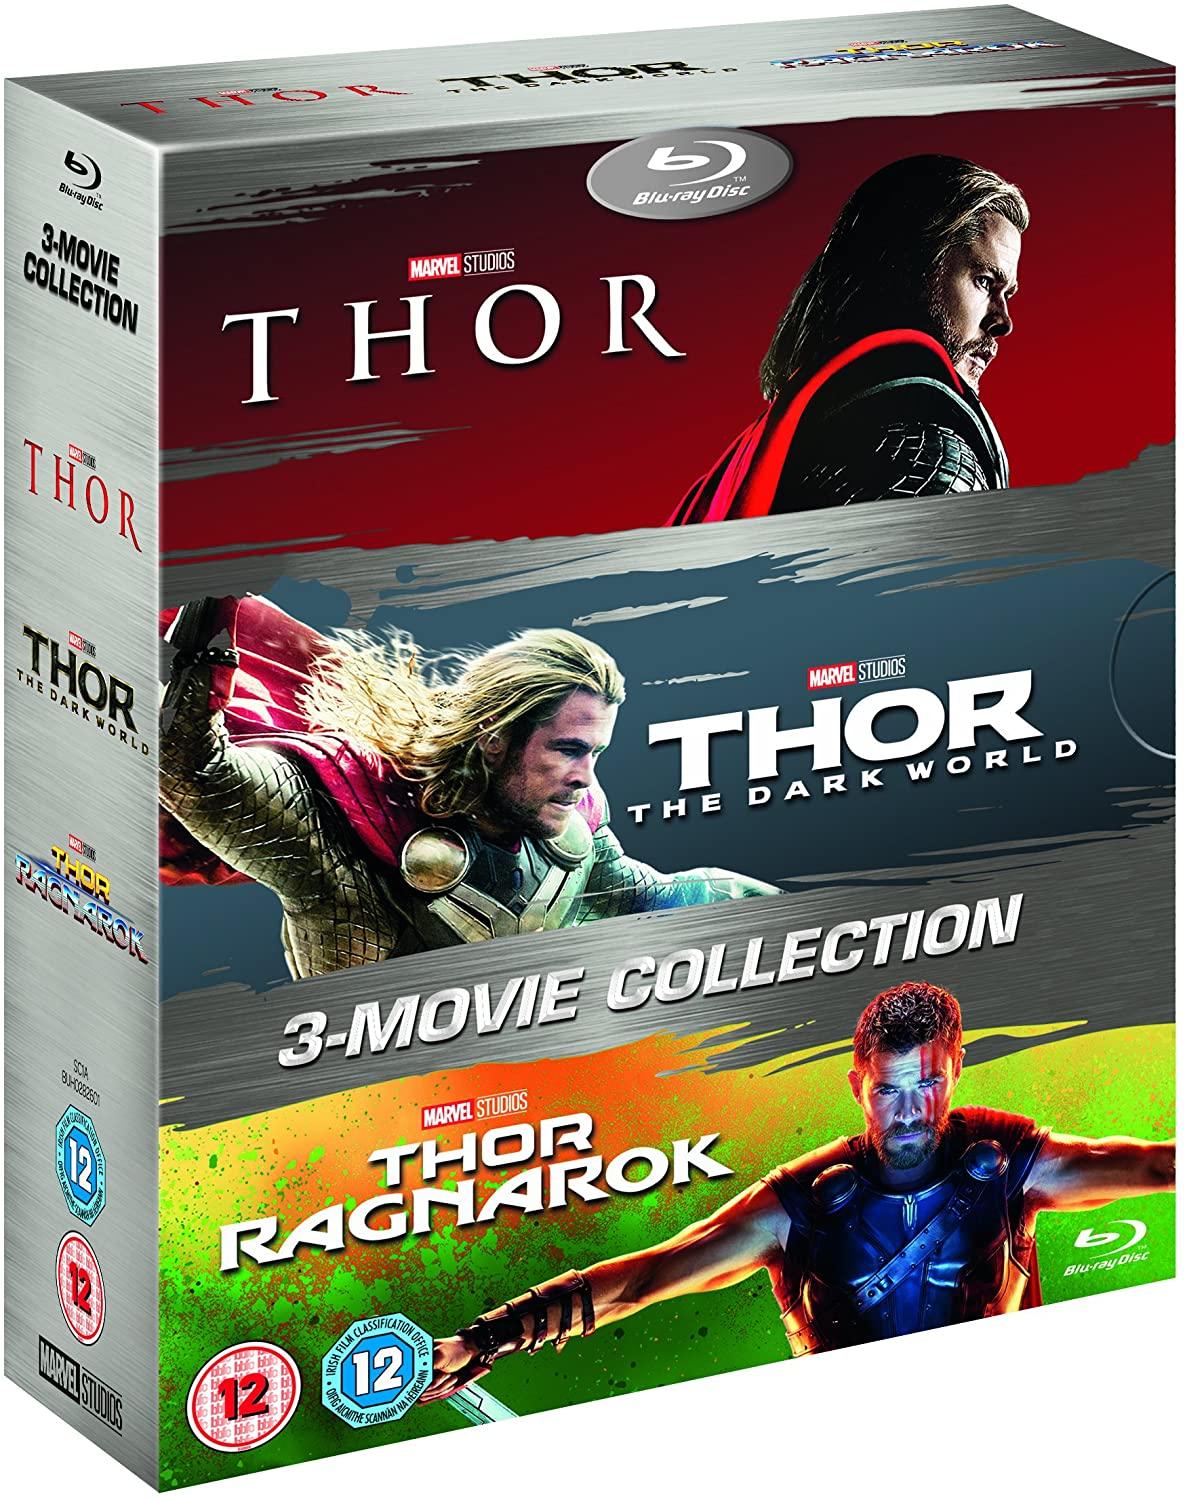 THOR: 3-MOVIE COLLECTION 3BLU-RAY